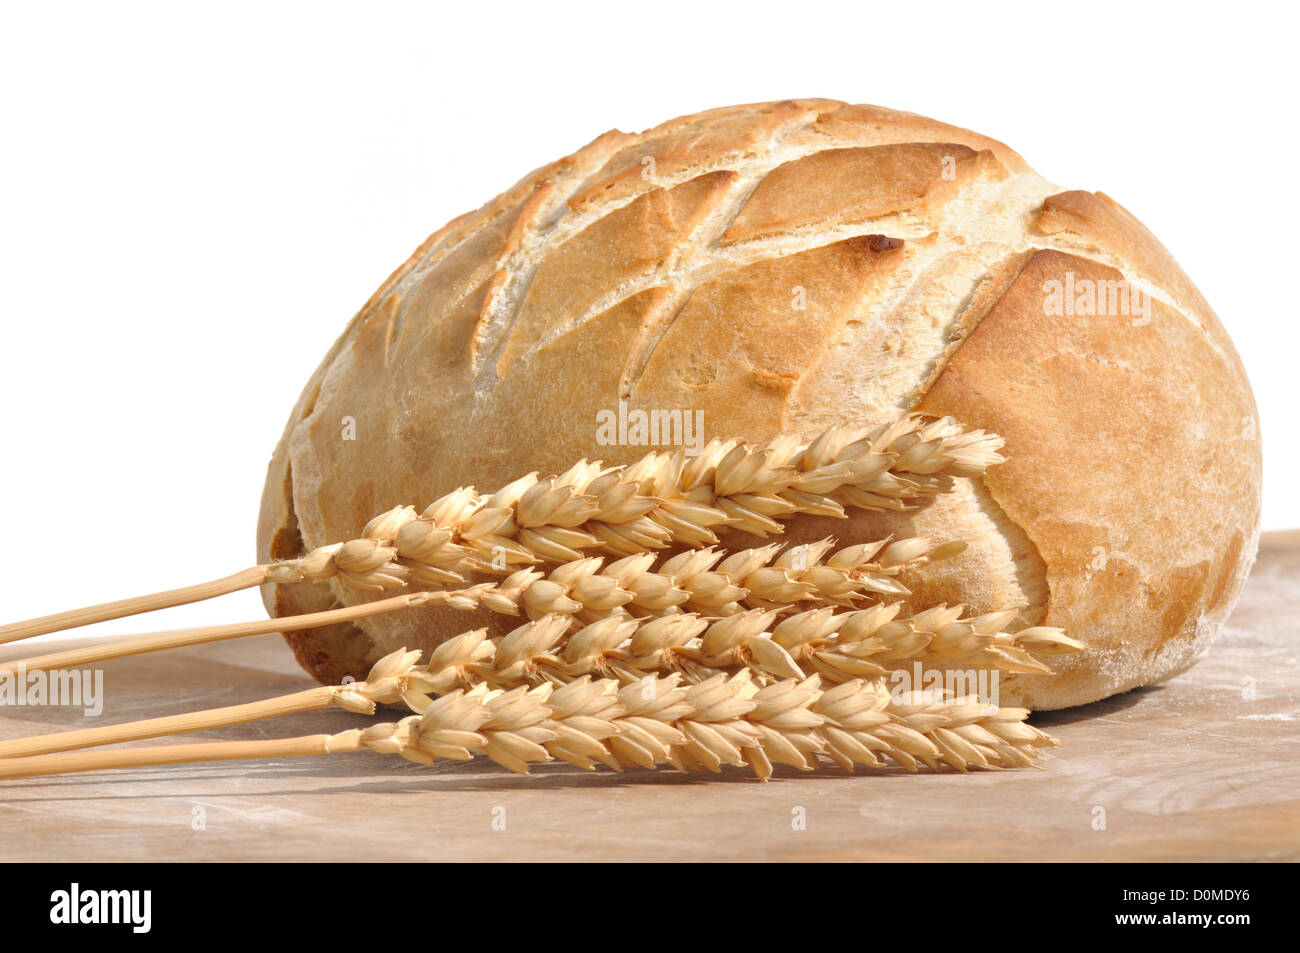 beautiful golden loaf of bread and wheat ears on white background Stock Photo